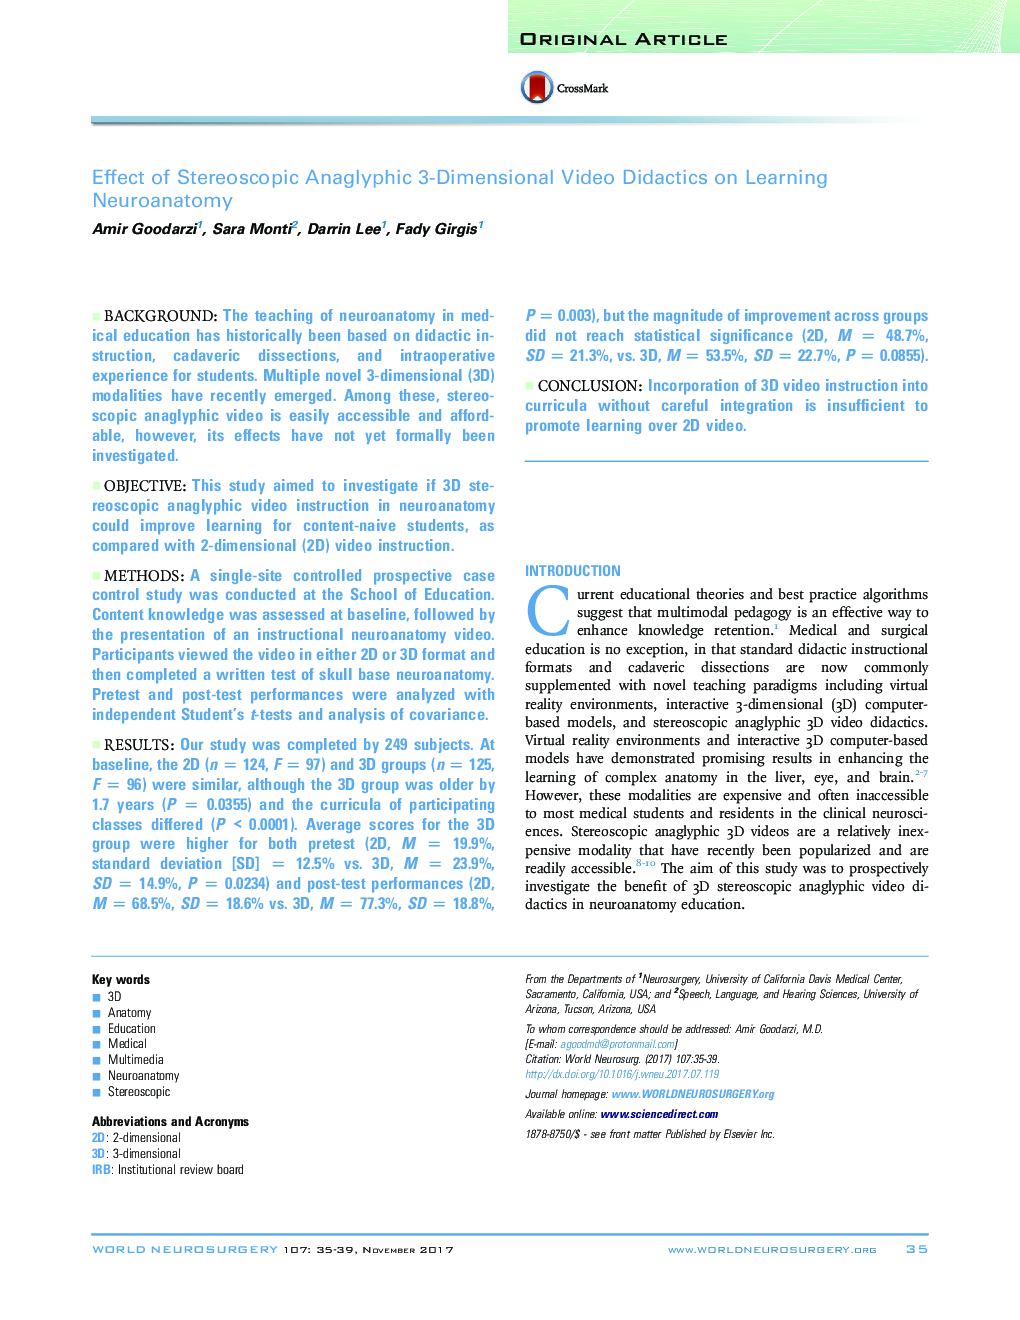 Effect of Stereoscopic Anaglyphic 3-Dimensional Video Didactics on Learning Neuroanatomy